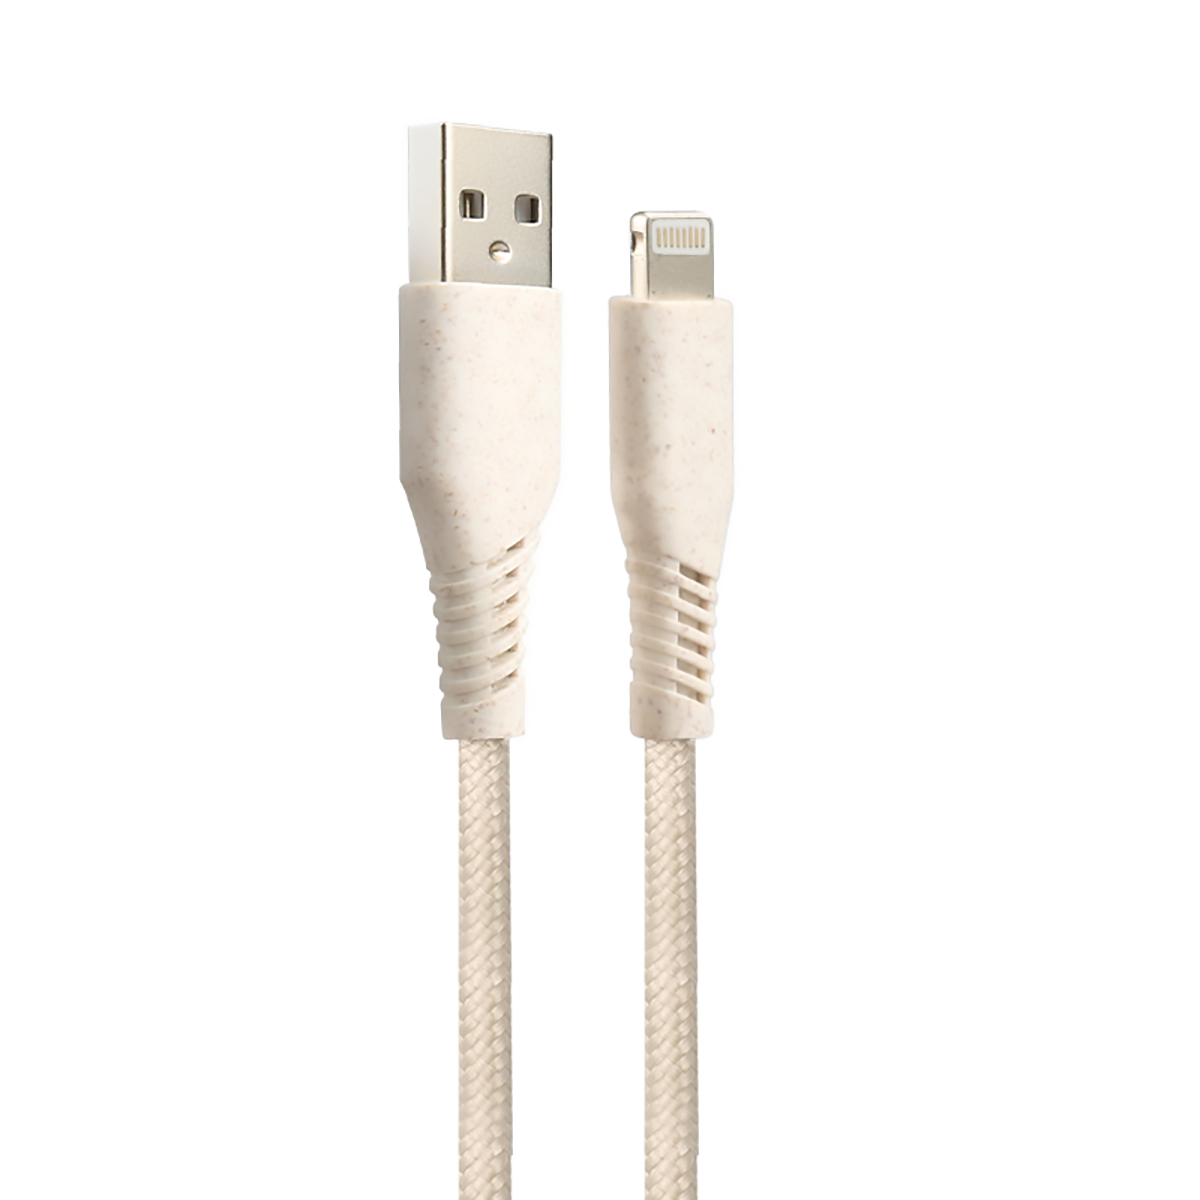 Straw wheat Lighting 8 pin data cable 1m